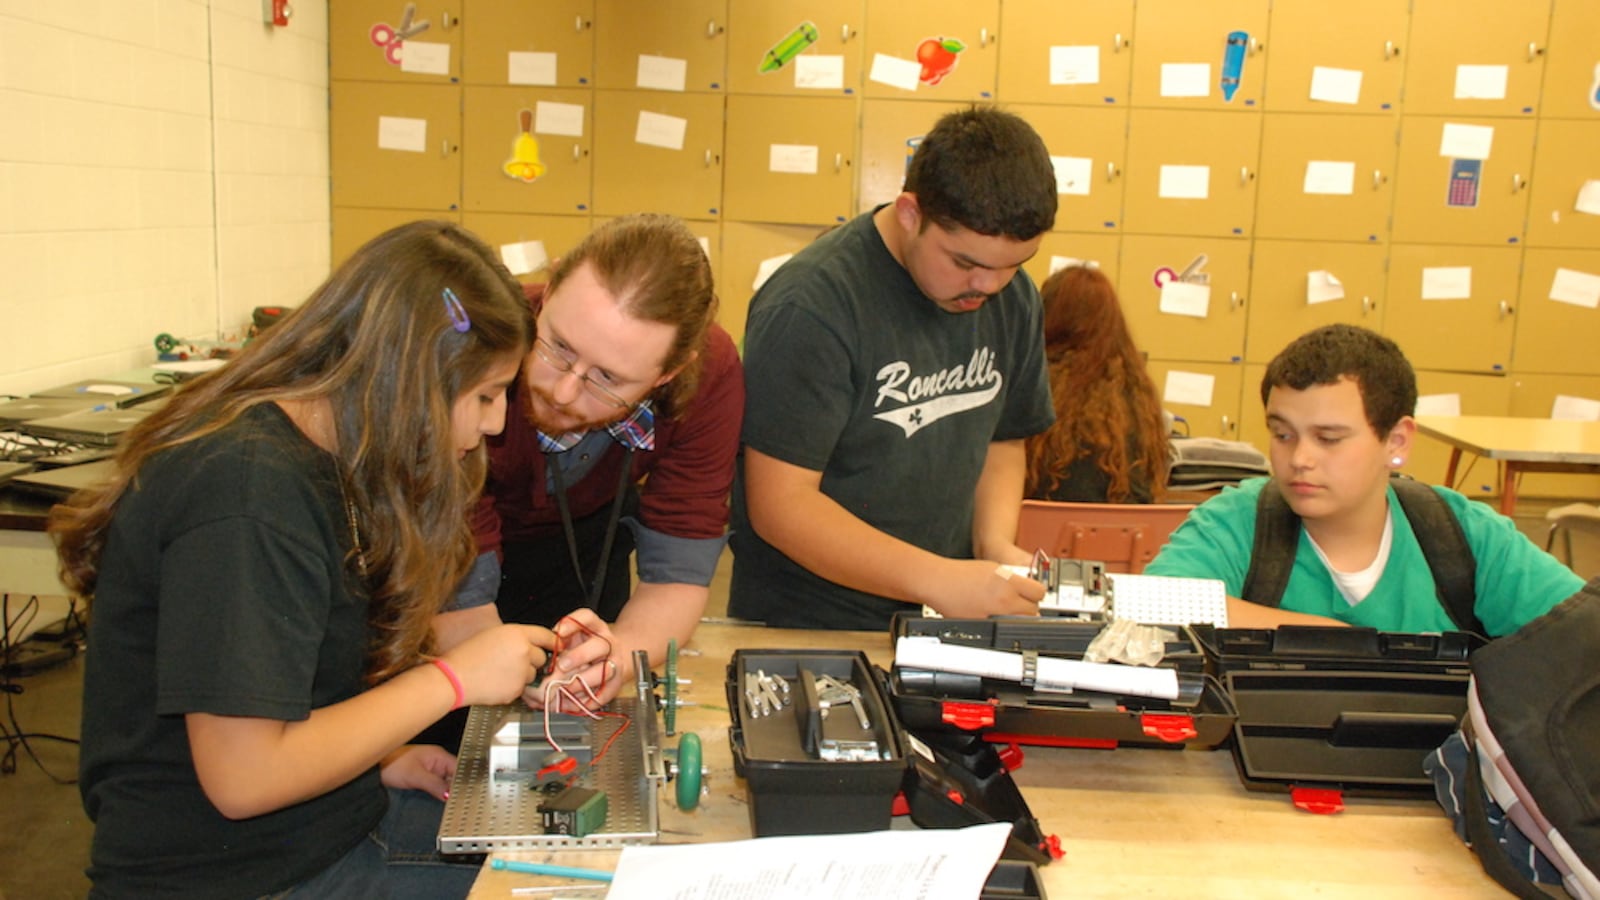 Roncalli Middle School social studies teacher Michael Lonsberry, center left, works with students on a robotics project in April. Roncalli is the lowest performing middle school in the state. As part of the district's turnaround effort, it is rolling out a science, technology, engineering, and math program.